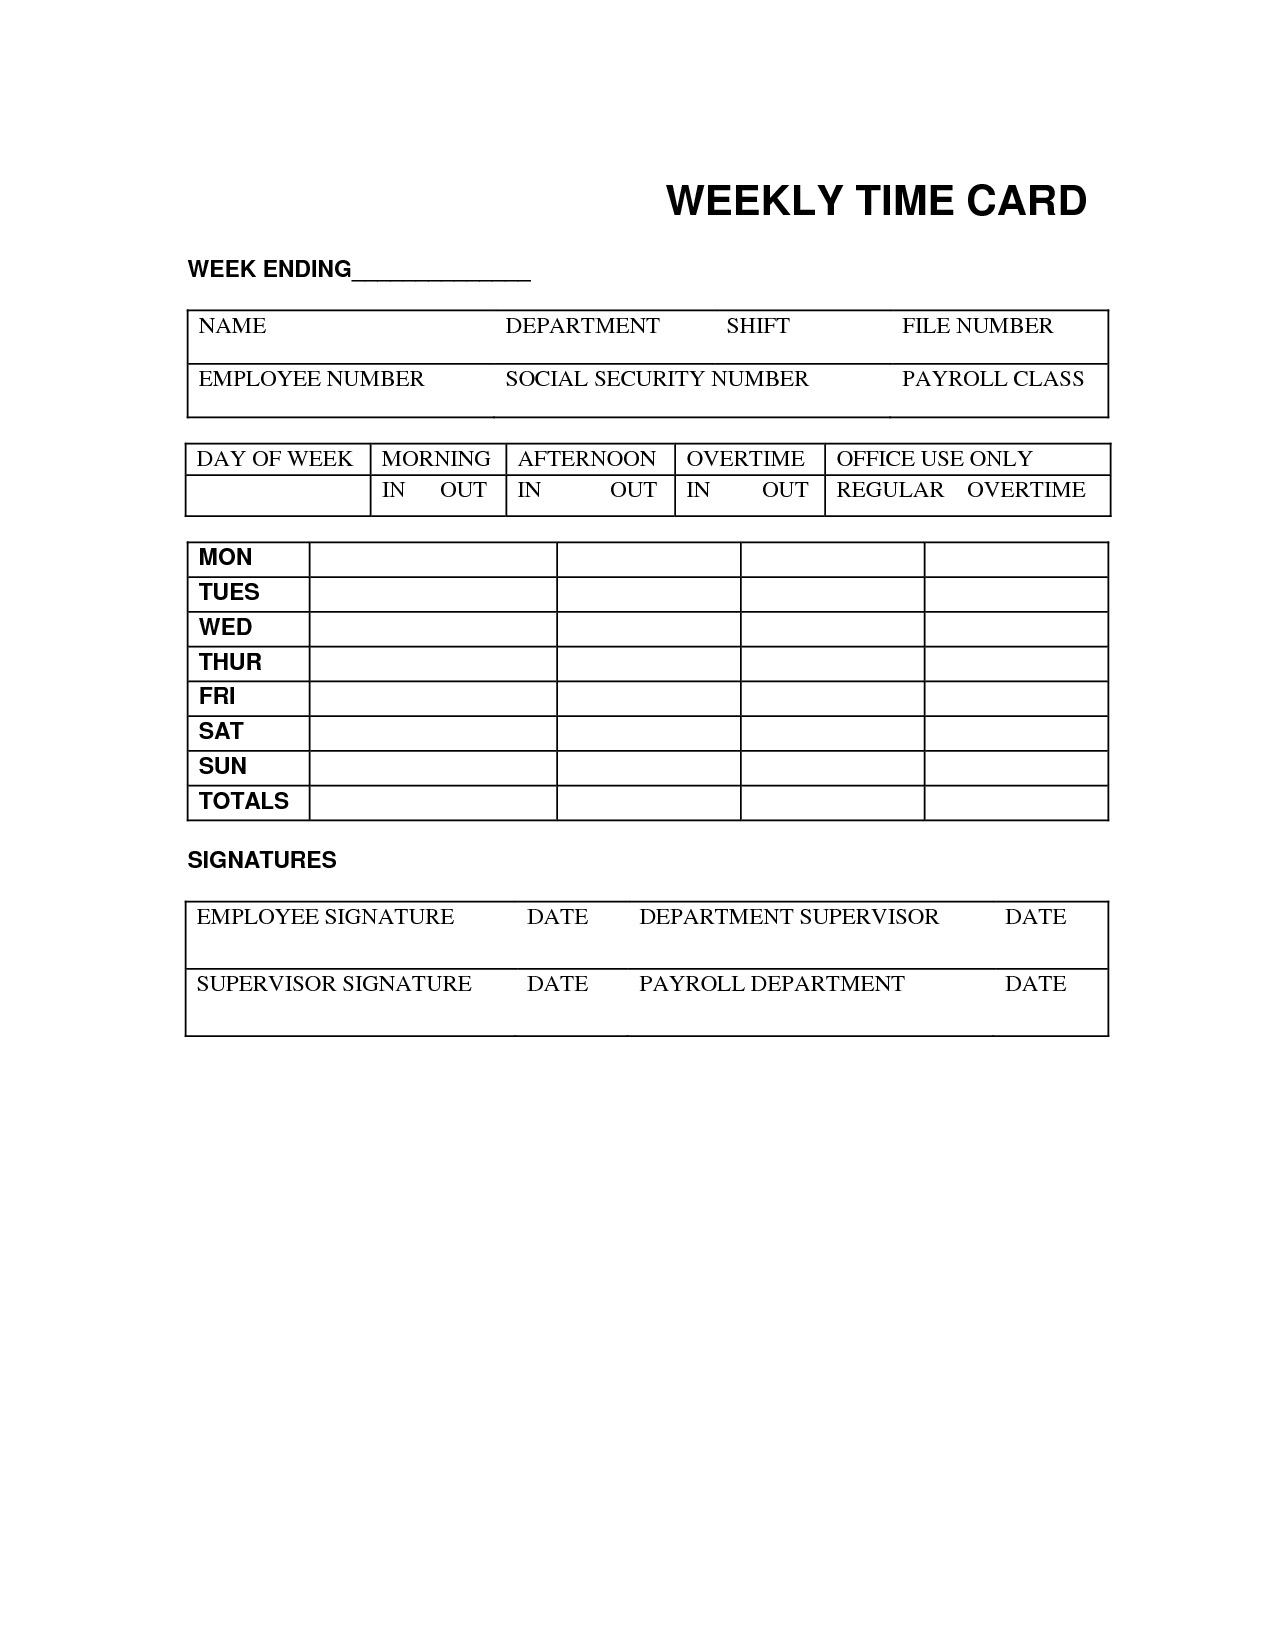 4-best-images-of-printable-weekly-time-card-template-free-printable